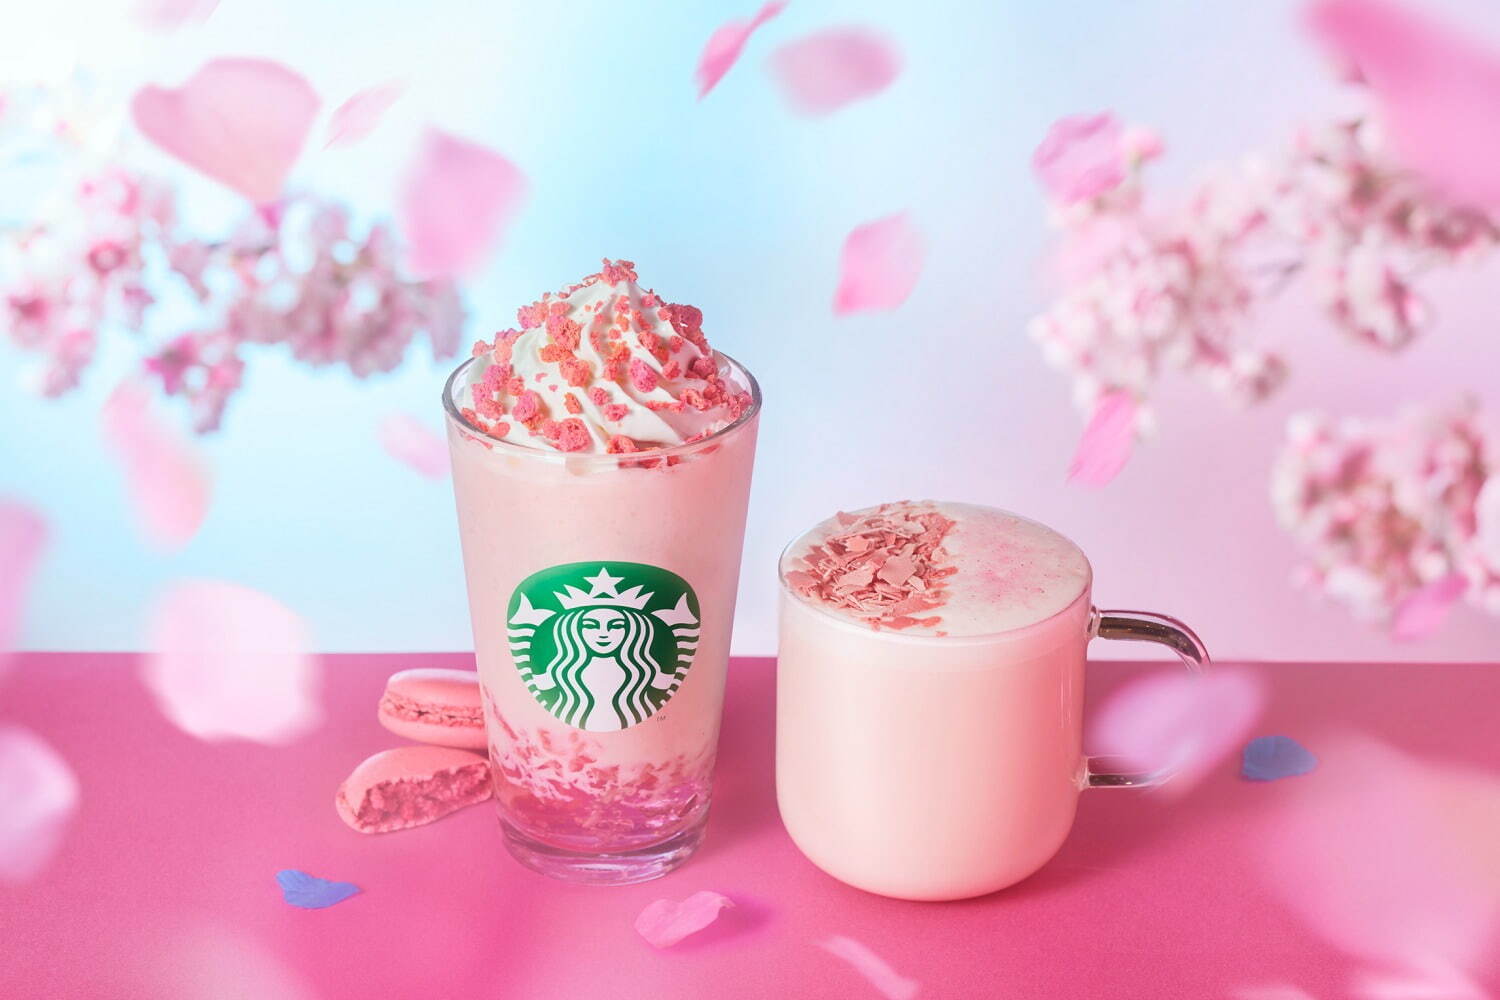 https://soranews24.com/wp-content/uploads/sites/3/2023/02/Starbucks-Japan-sakura-cherry-blossom-Frappuccino-drinks-2023-new-sweets-cakes-limited-edition-exclusive-cookies-doughnuts-photos-1.jpeg